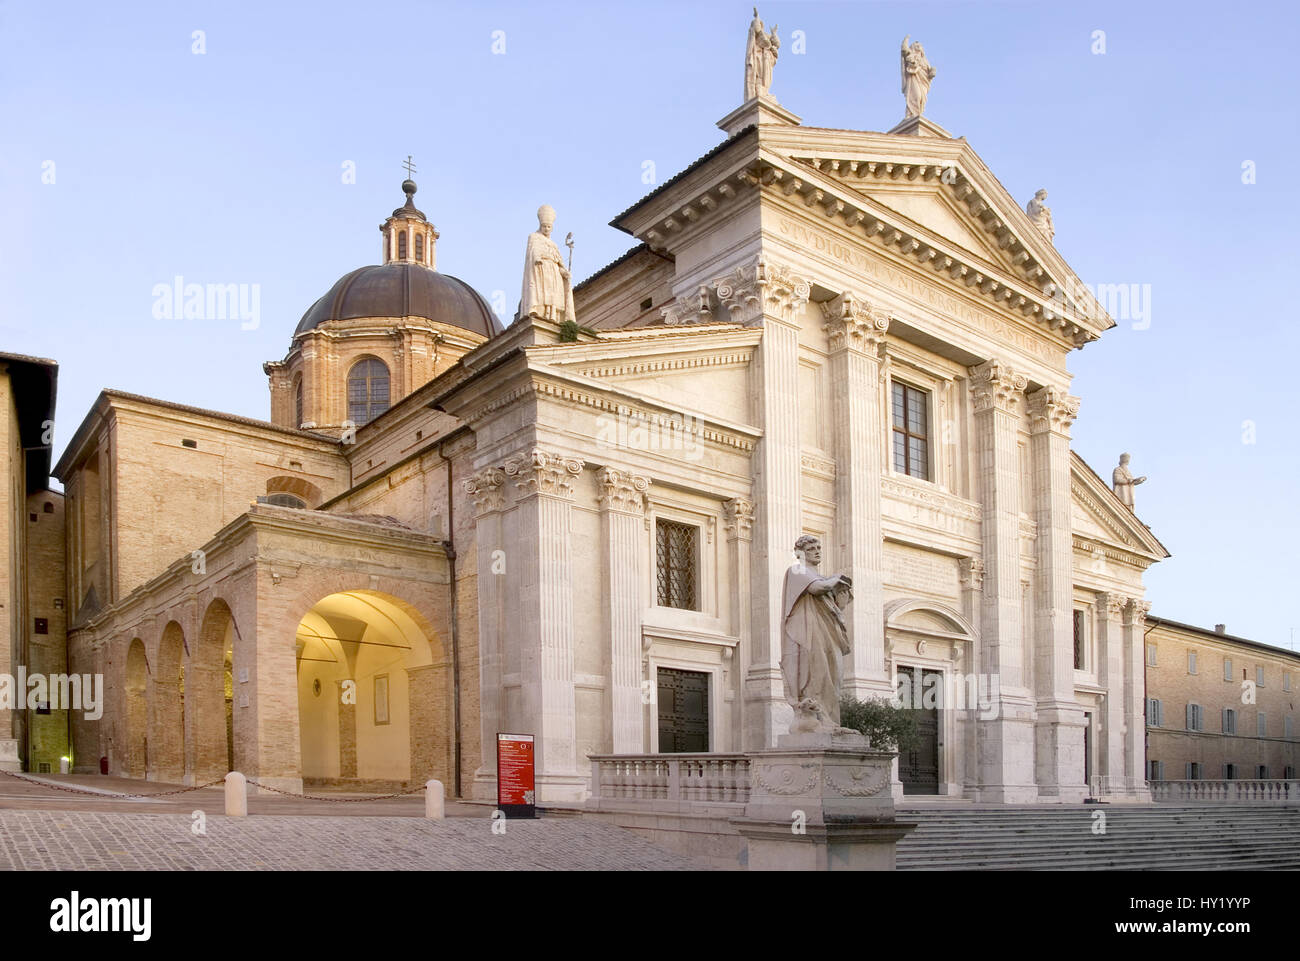 Image of the Duomo of Urbino (cathedral), a church founded in 1021 over a 6th century religious edifice. Urbino is a walled city in the Marche region  Stock Photo